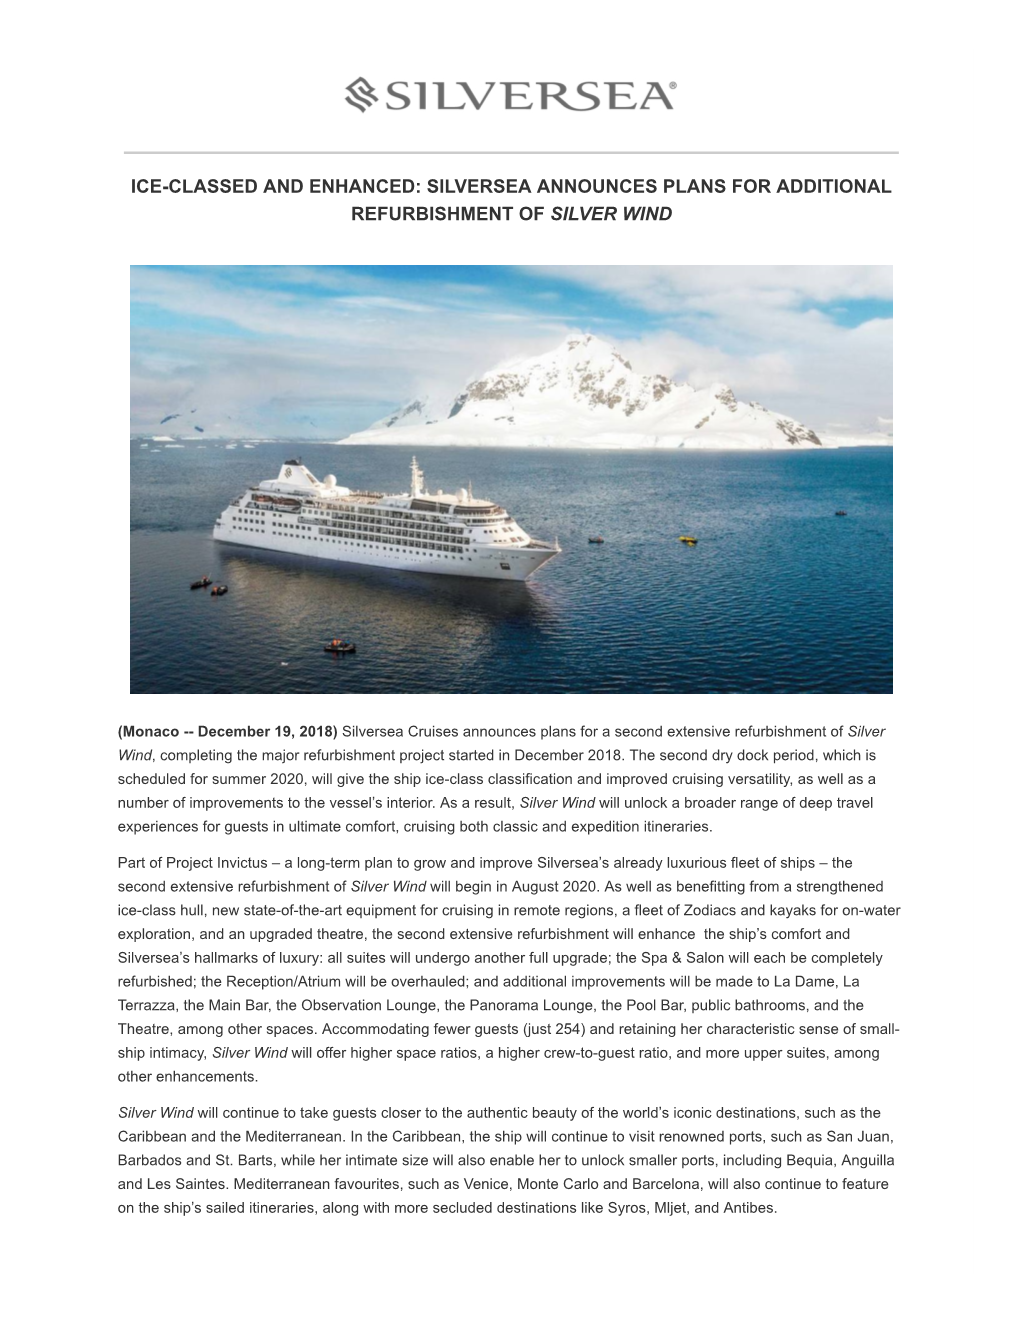 Ice-Classed and Enhanced: Silversea Announces Plans for Additional Refurbishment of Silver Wind